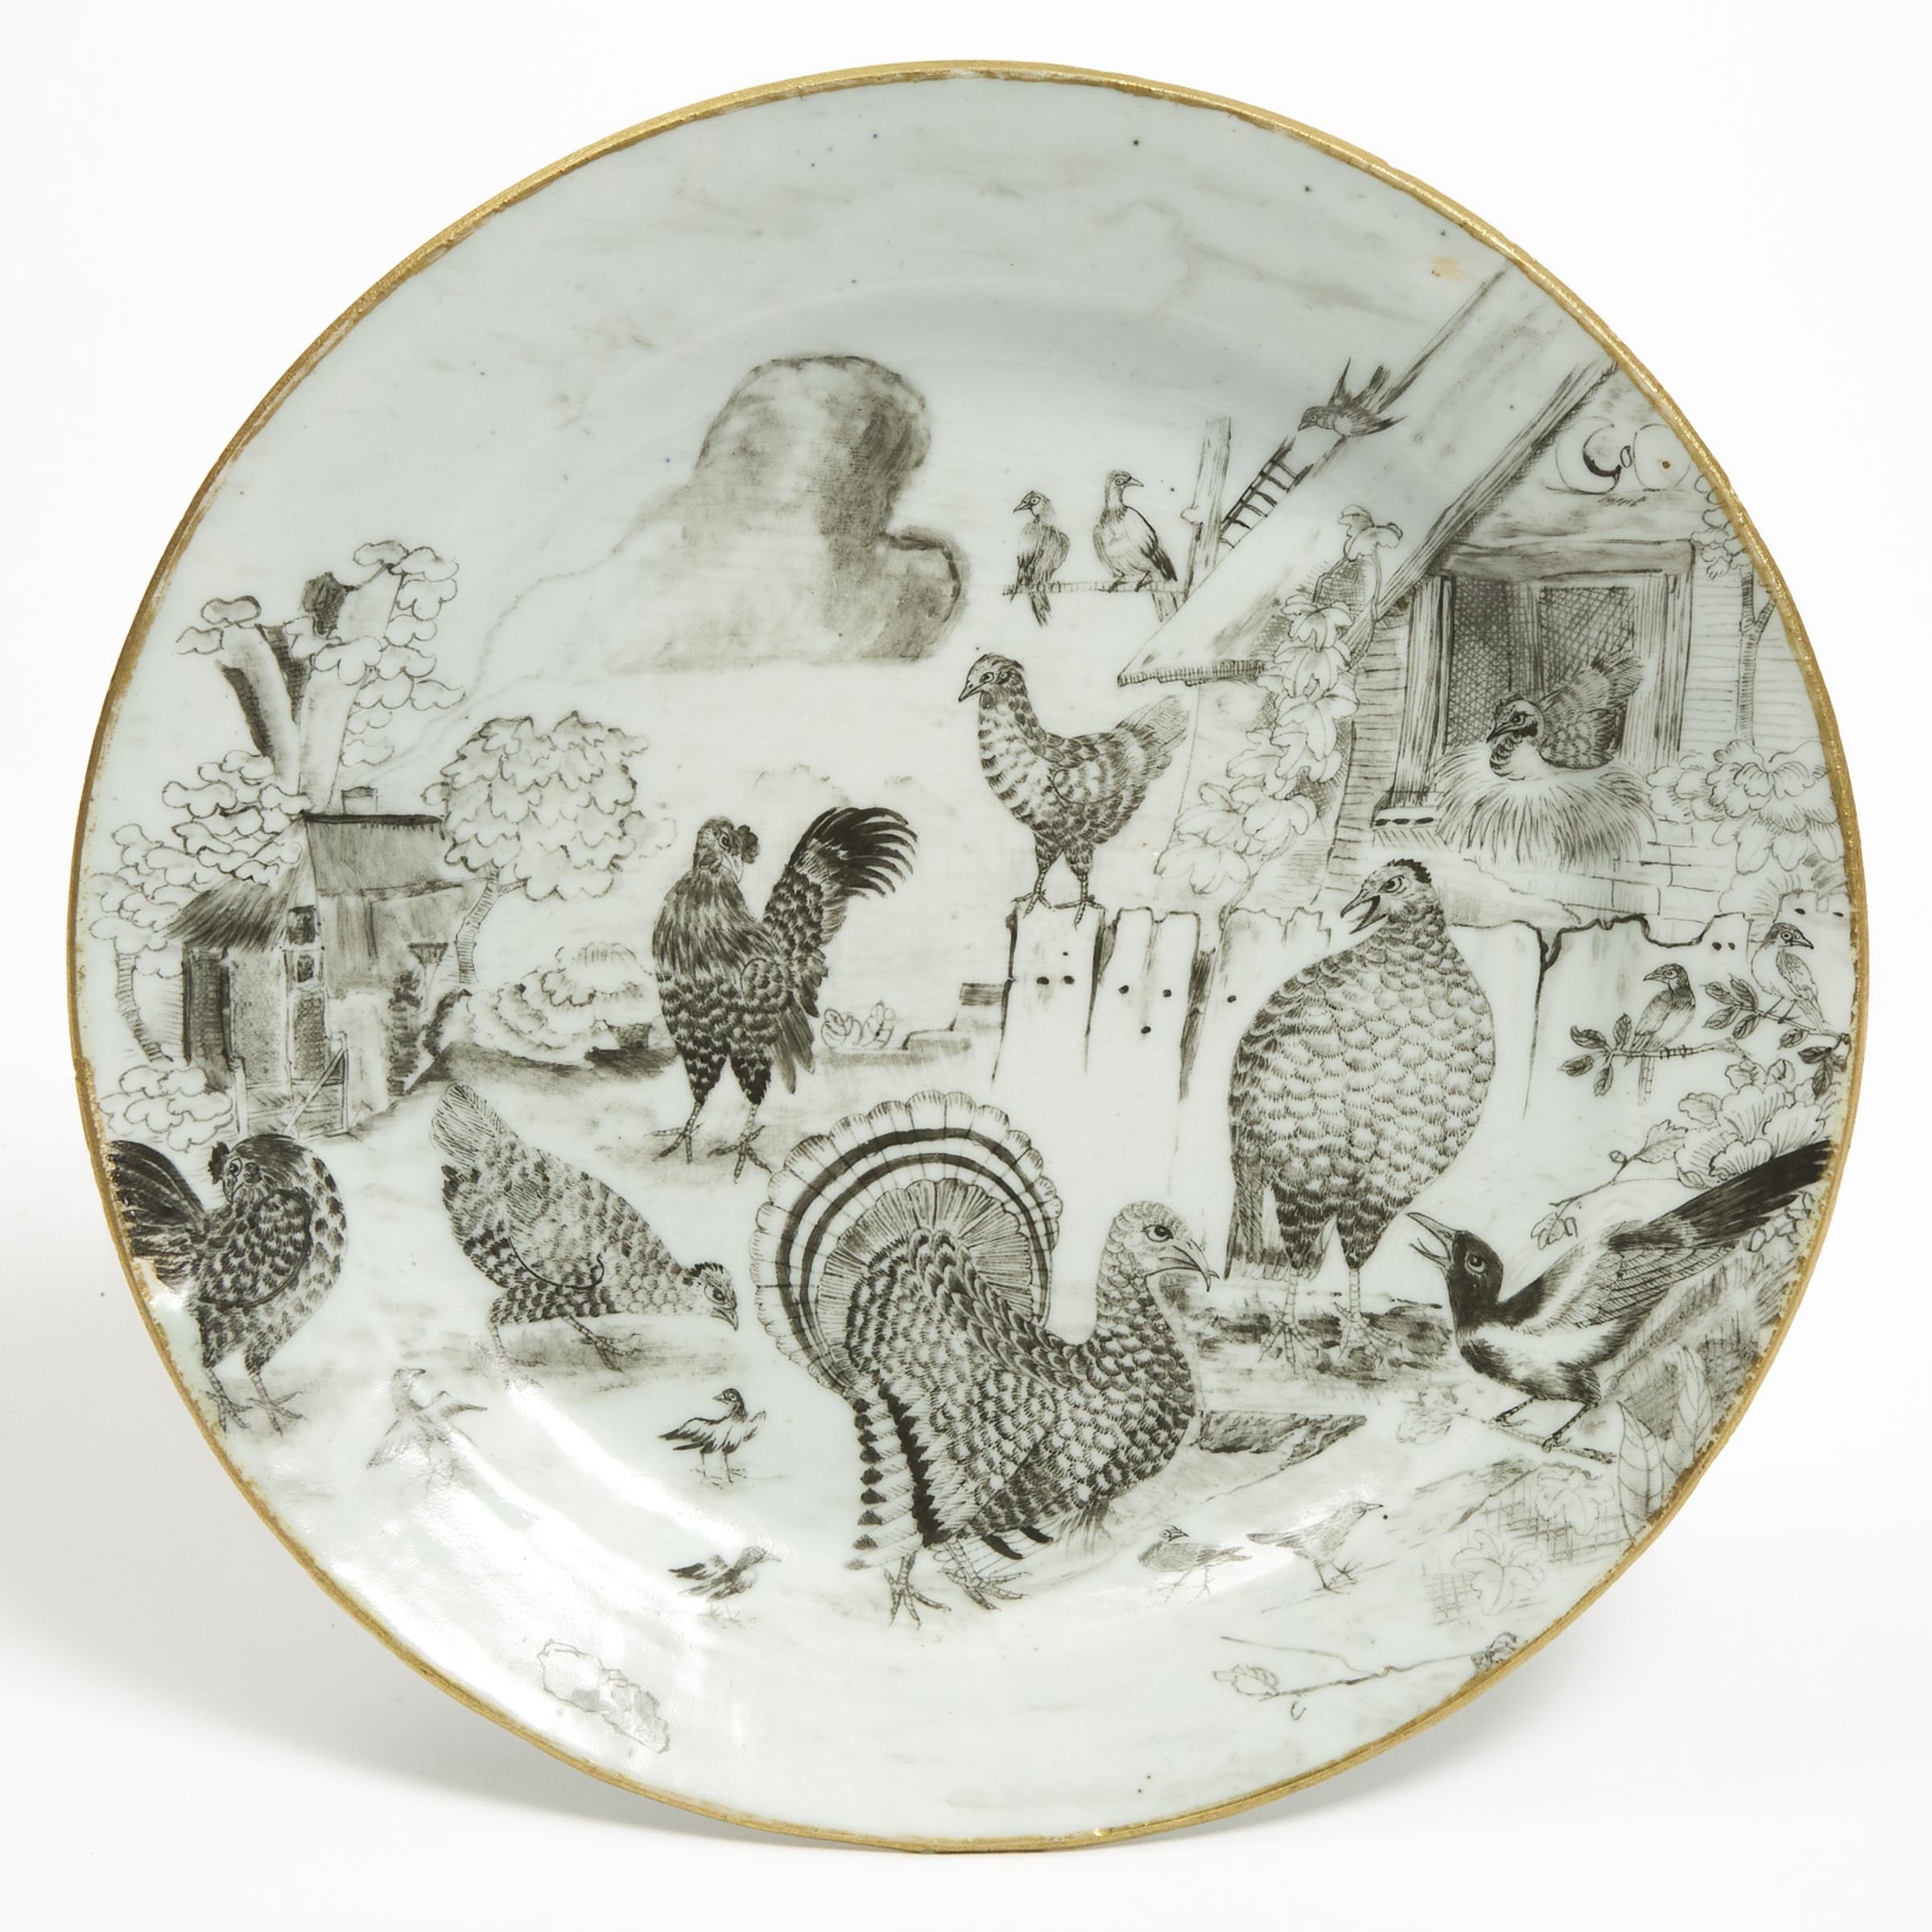 A Chinese Export Grisaille and Gilt-Decorated 'Turkey' Plate, Qianlong Period, Circa 1750